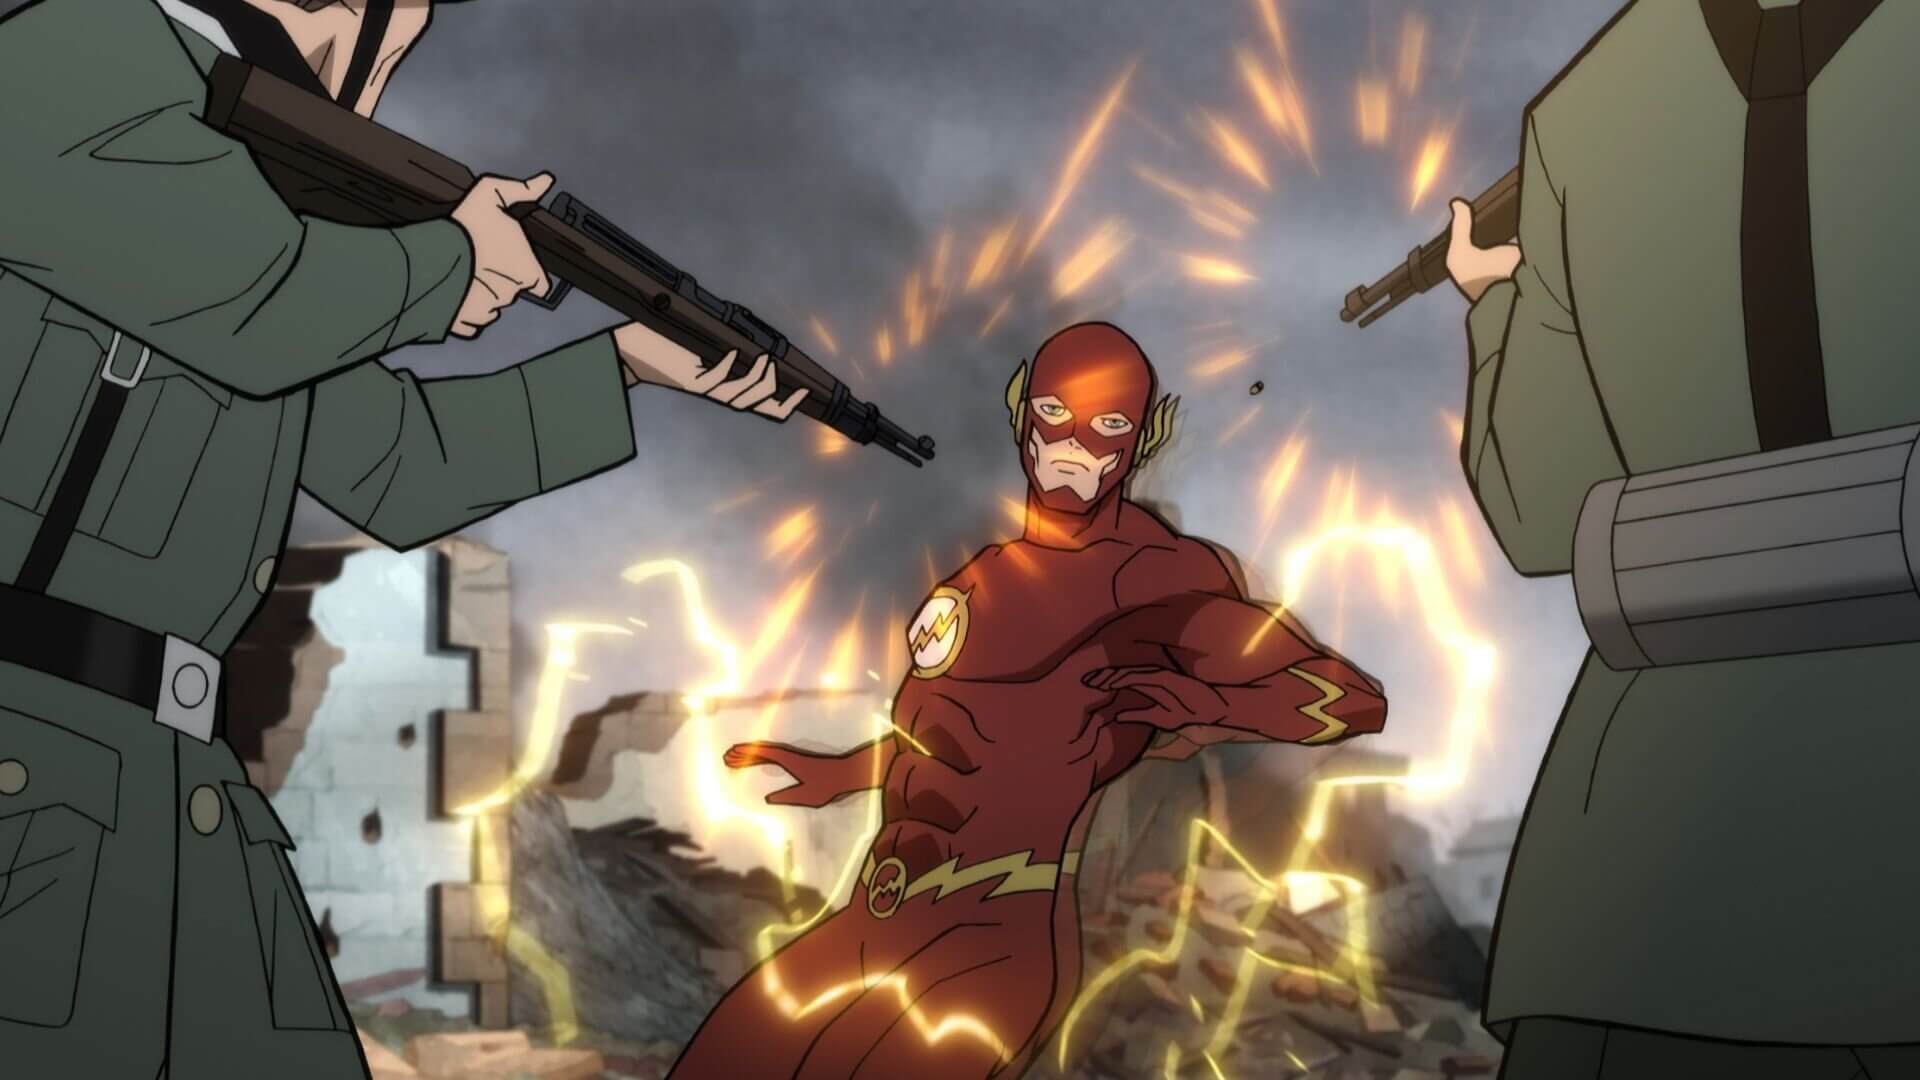 justice society world war 2 barry allen the flash fighting nazis